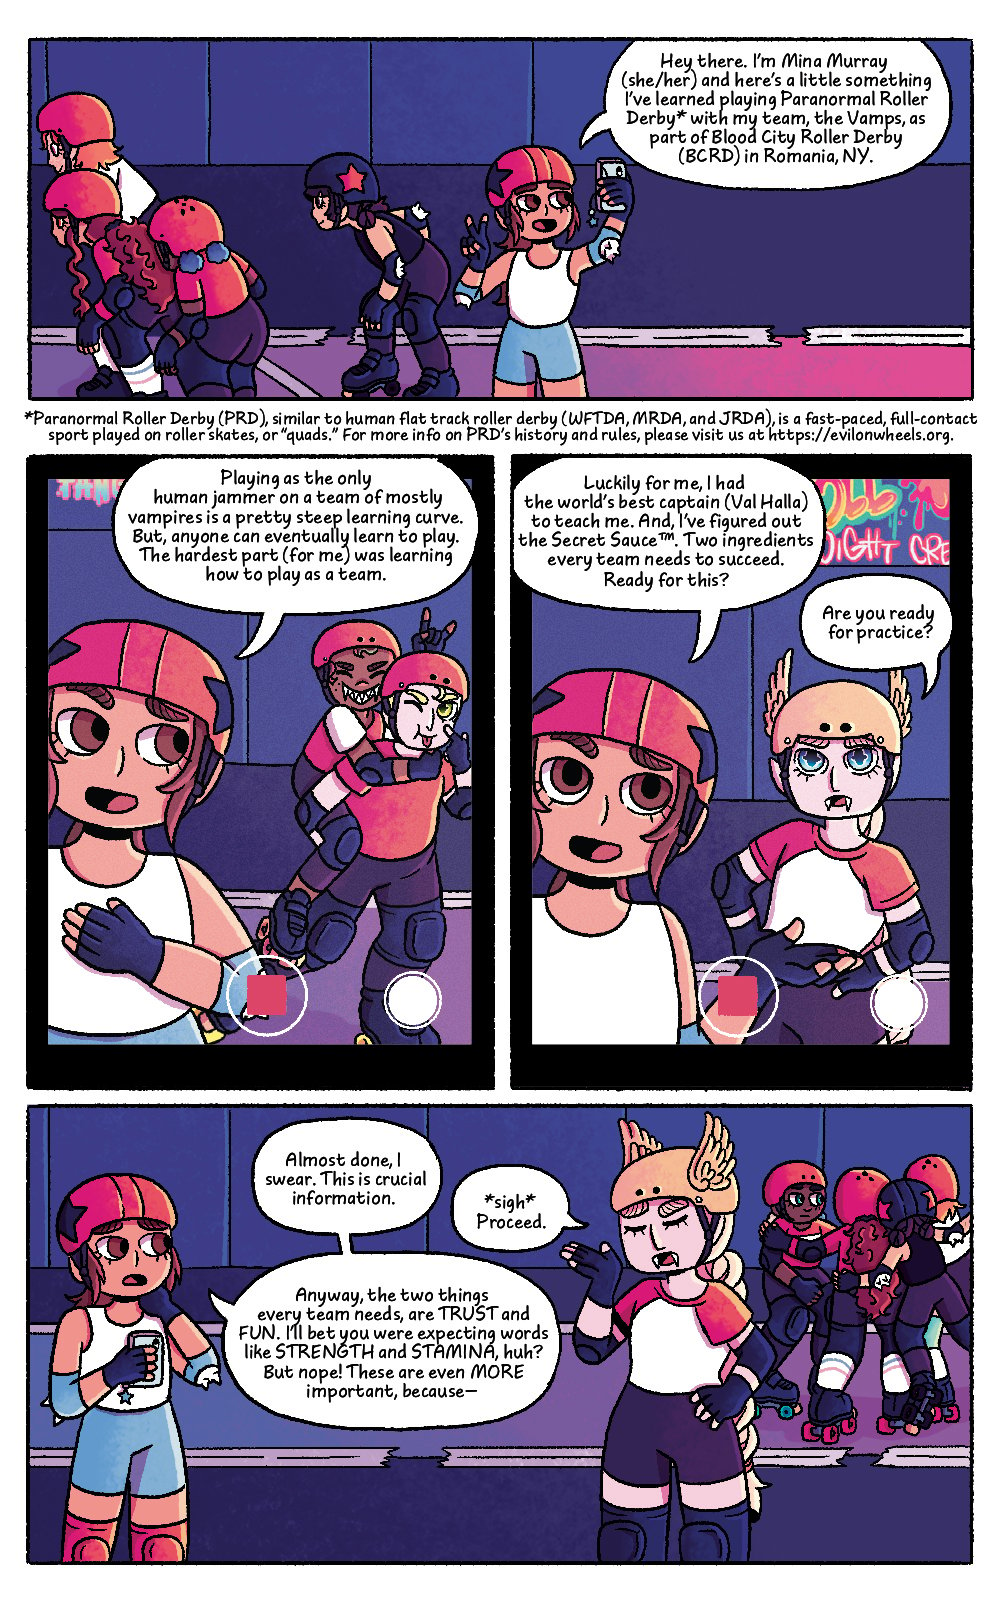 Four panel comic featuring the characters from Bat City Rollers, set on a roller derby rink. Comic panel one shows Mina holding up her phone to record a video. She is wearing a helmet and other roller derby gear. A few members of her team are skating past her. Mina's speech bubble reads "Hey there. I'm Mina Murray (she/her) and here's a little something I've learned playing Paranormal Roller Derby with my team, The Vamps, as part of Blood City Roller Derby (BCRD) in Romania, NY."
Below the panel there is a description that reads: "Paranormal Roller Derby (PRD), similar to human flat track roller derby (WFTDA, MRDA, and JRDA), is a fast-paced, full-contact sport played on roller skates, or "quads". For more info on PRD's history and rules, please visit us at http:s//evilonwheels.org
The second panel shows a close-up of the phone screen which is recording, featuring Mina off tho the side and two of her teammates posing making funny faces behind her. Mina's speech bubble reads "Playing as the only human jammer on a team of mostly vampires is a pretty steep learning curve. But, anyone can eventually learn to play. The hardest part (for me) was learning how to play as a team.
The third panel shows a close-up of the phone screen, recording, featuring Mina off to the side and team captain Val Halla standing next to her. Mina's speech bubble reads "Luckily for me, I had the world's best captain (Val Halla) to teach me. And, I've figured out the Secret Sauce. Two ingredients every team needs to succeed. Ready for this? Val Halla's speech bubble reads "Are you ready for practice?"
The fourth panel shows the team in a huddle in the background, with Mina and Val Halla facing each other having a conversation. Mina looks apologetic, and Val Halla looks annoyed. Mina's first speech bubble reads "Almost done, I swear. This is crucial information." Val Halla's speech bubble reads "Sigh. Proceed." Mina's second bubble reads "Anyway, the two things every team needs are TRUST and FUN. I'll be you were expecting words like STRENGTH and STAMINA, huh? But nope! These are even more important because -"